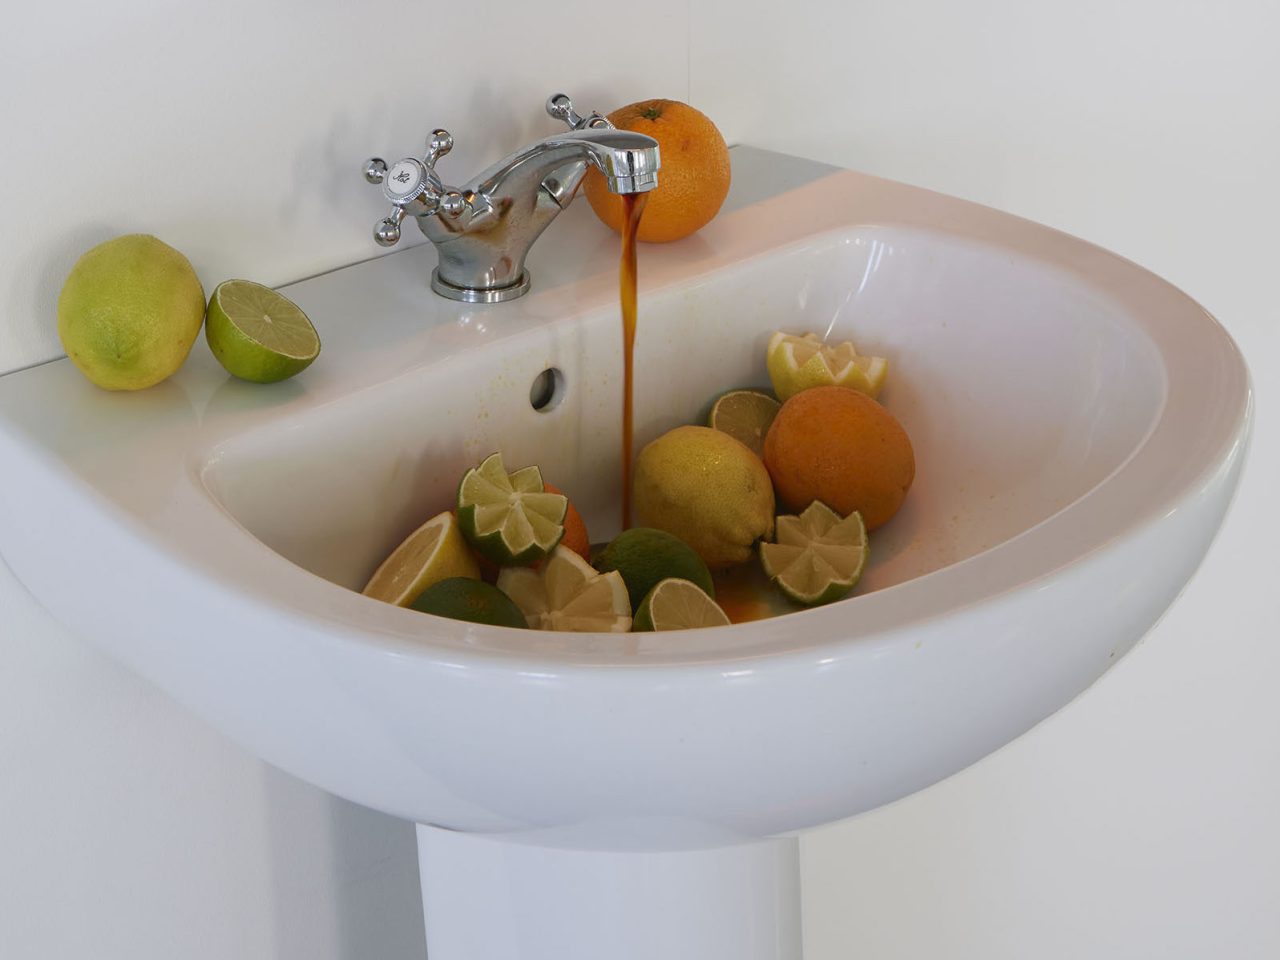 A sink with lemons, limes and oranges, some full and some cut with a pattern. They are in the sink with the tap letting out an orange liquid.